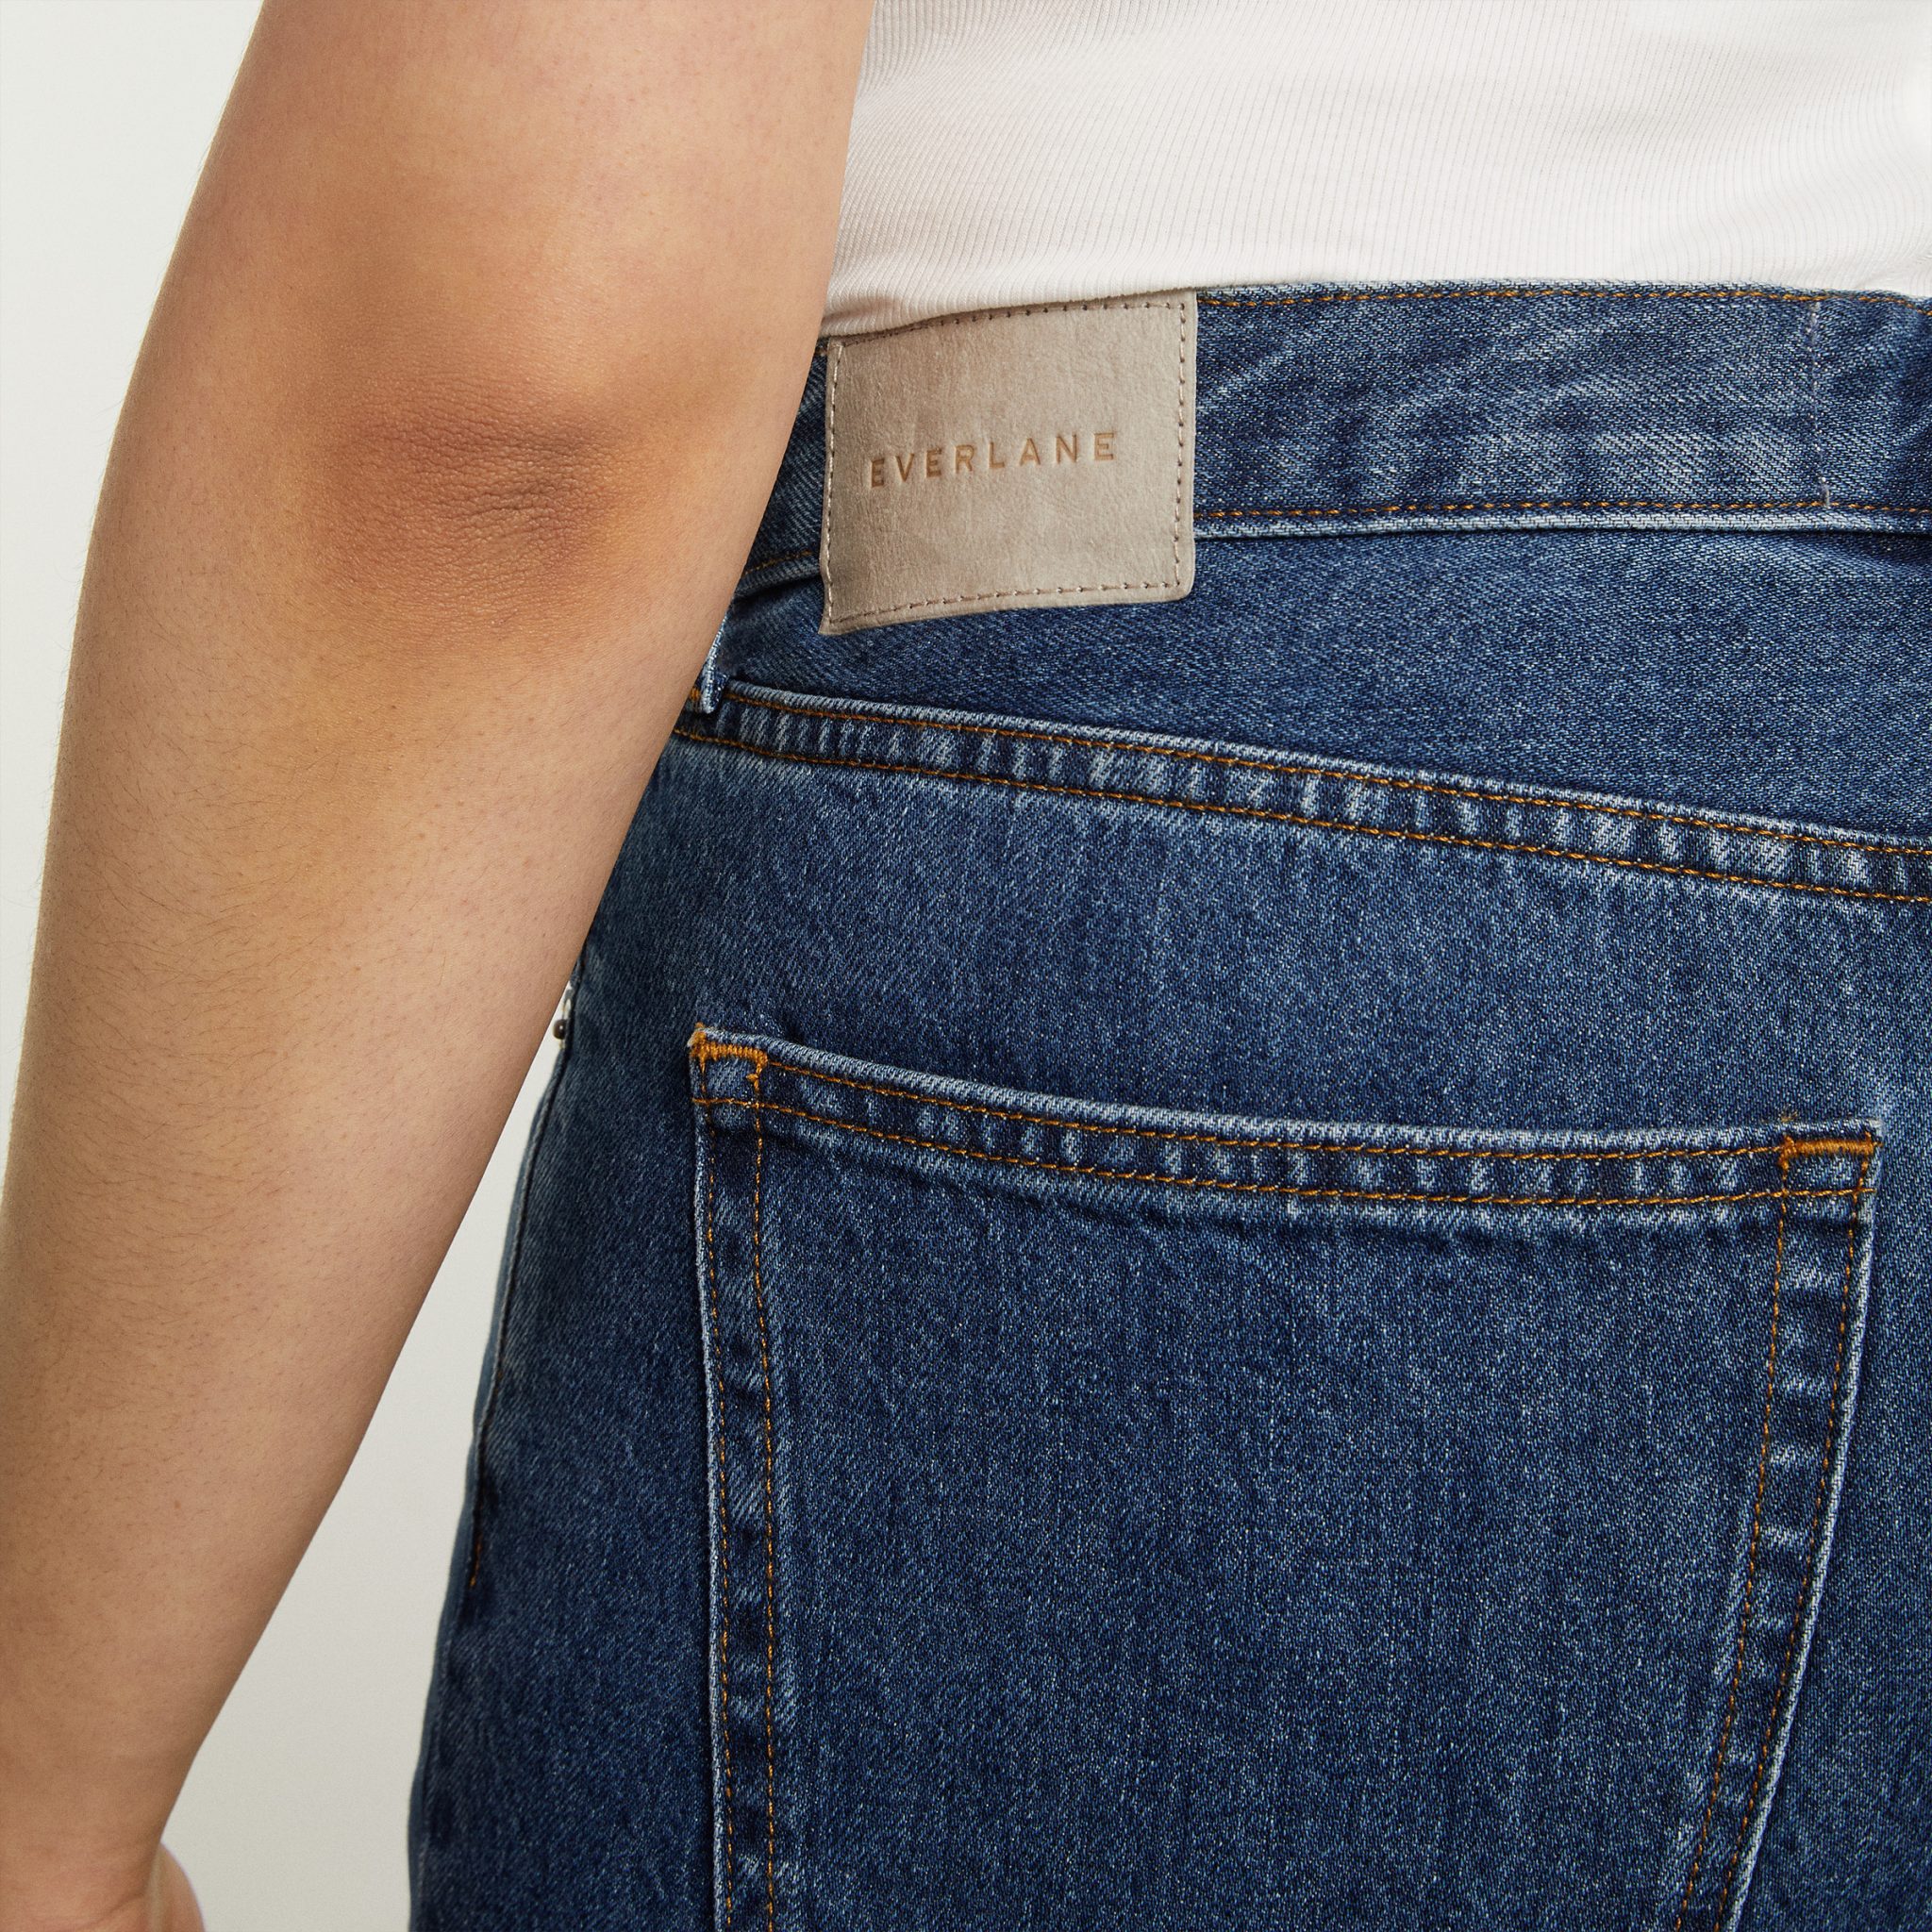 Everlane for Everyone the Gender Inclusive Jean